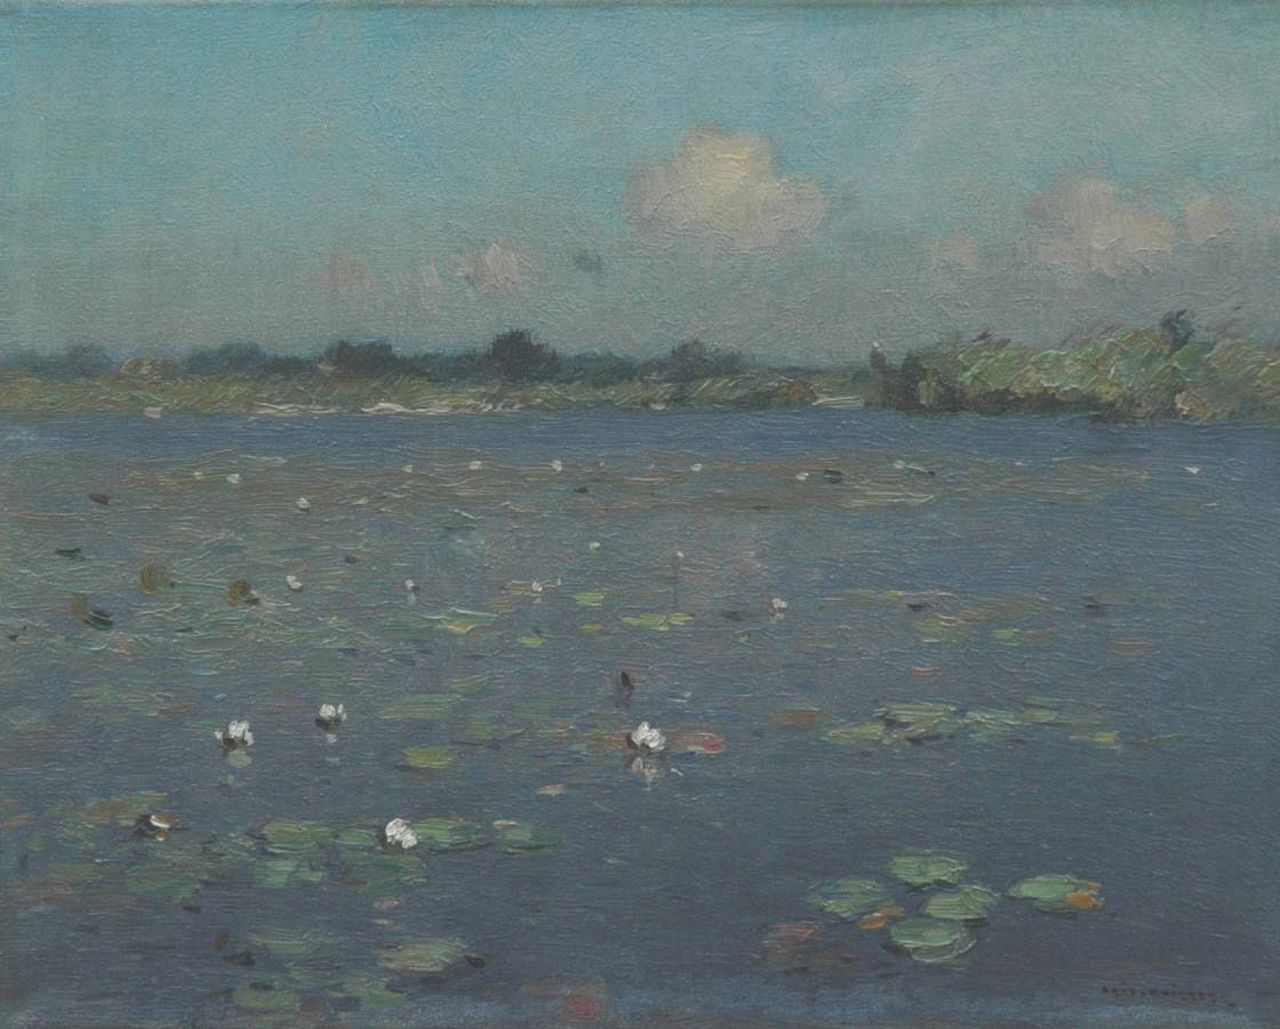 Knikker A.  | Aris Knikker, Water lilies, oil on canvas 24.4 x 30.4 cm, signed l.r.